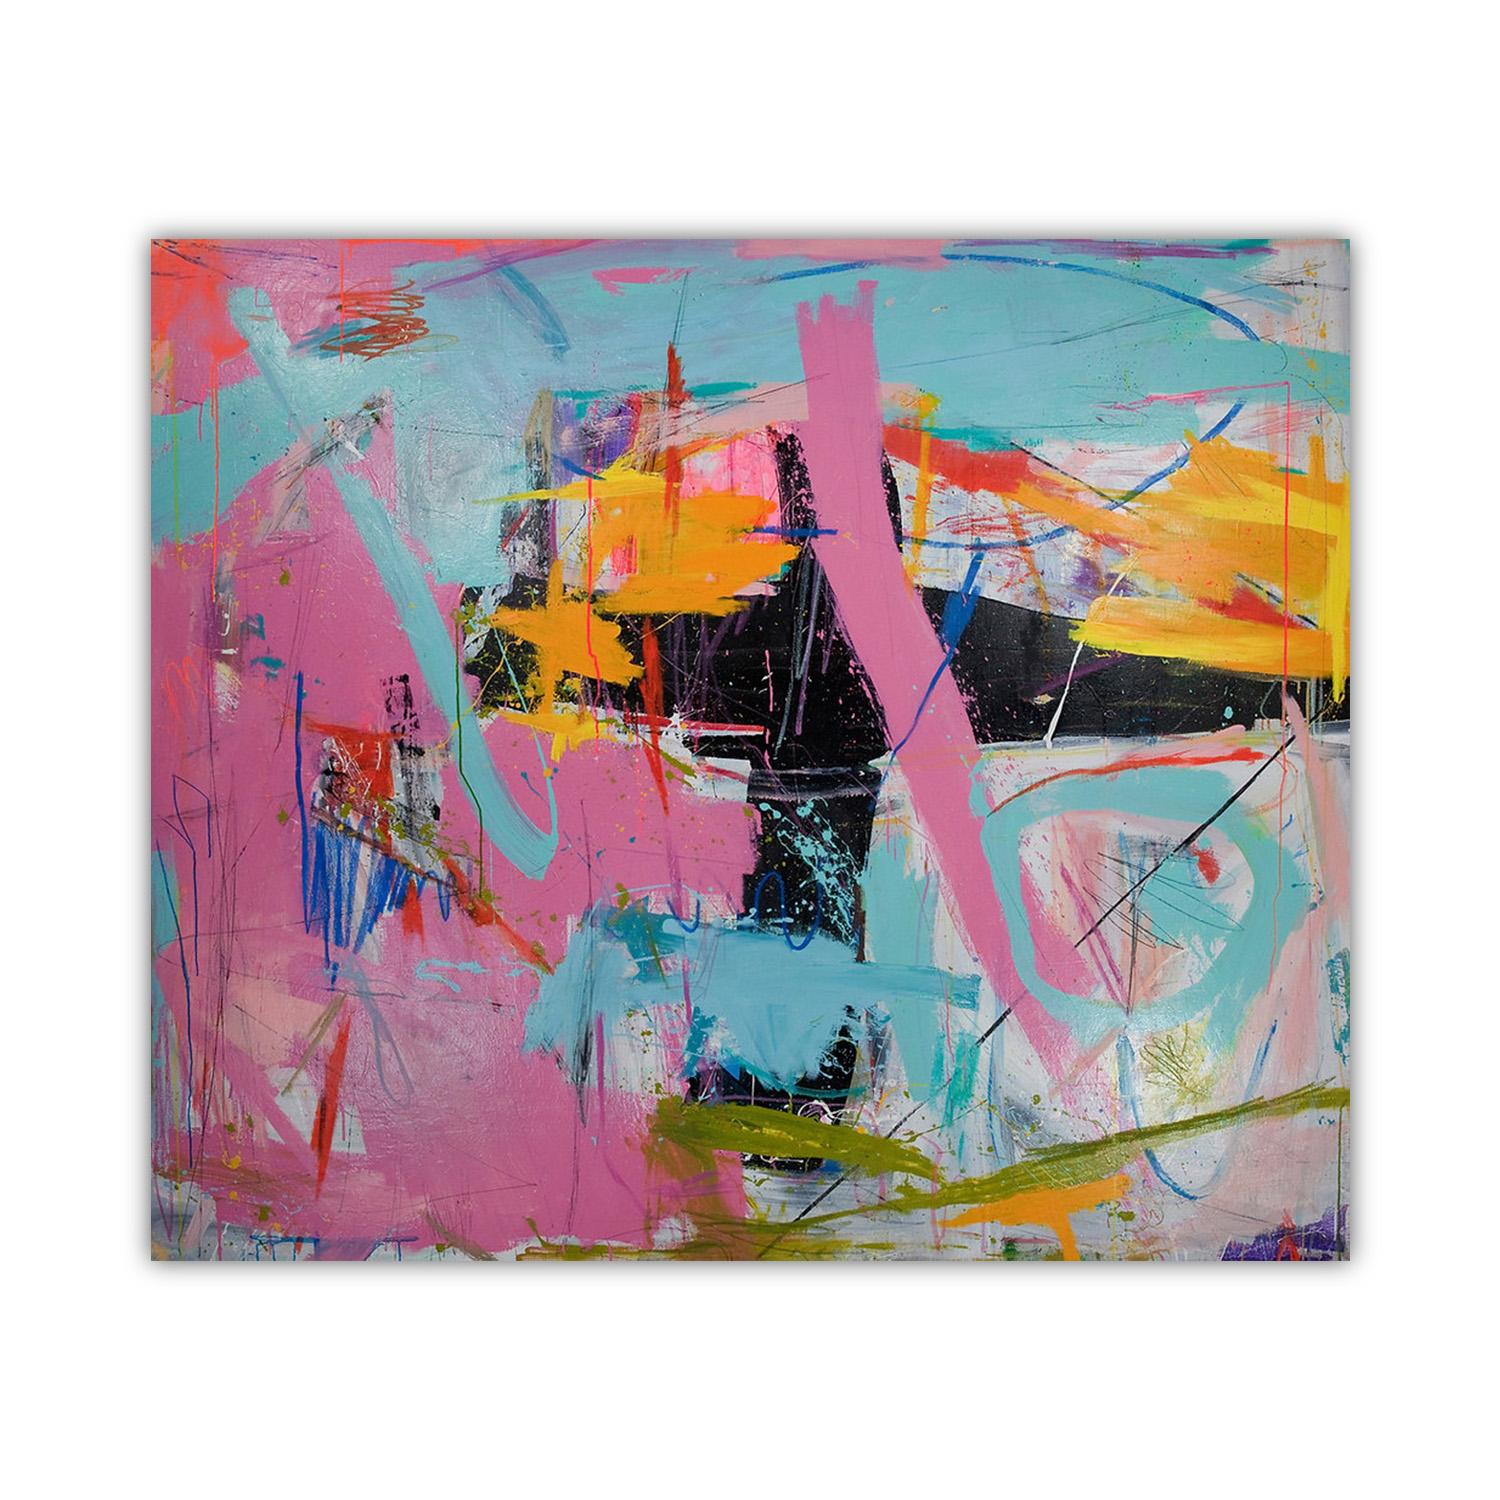 Ferm’s “My Coup” is centralized with a black structure, essentially dividing the canvas into quadrants. Long strokes of light pink and arctic blue defy this black structure, and clash across the topography. The piece is balanced out with violent